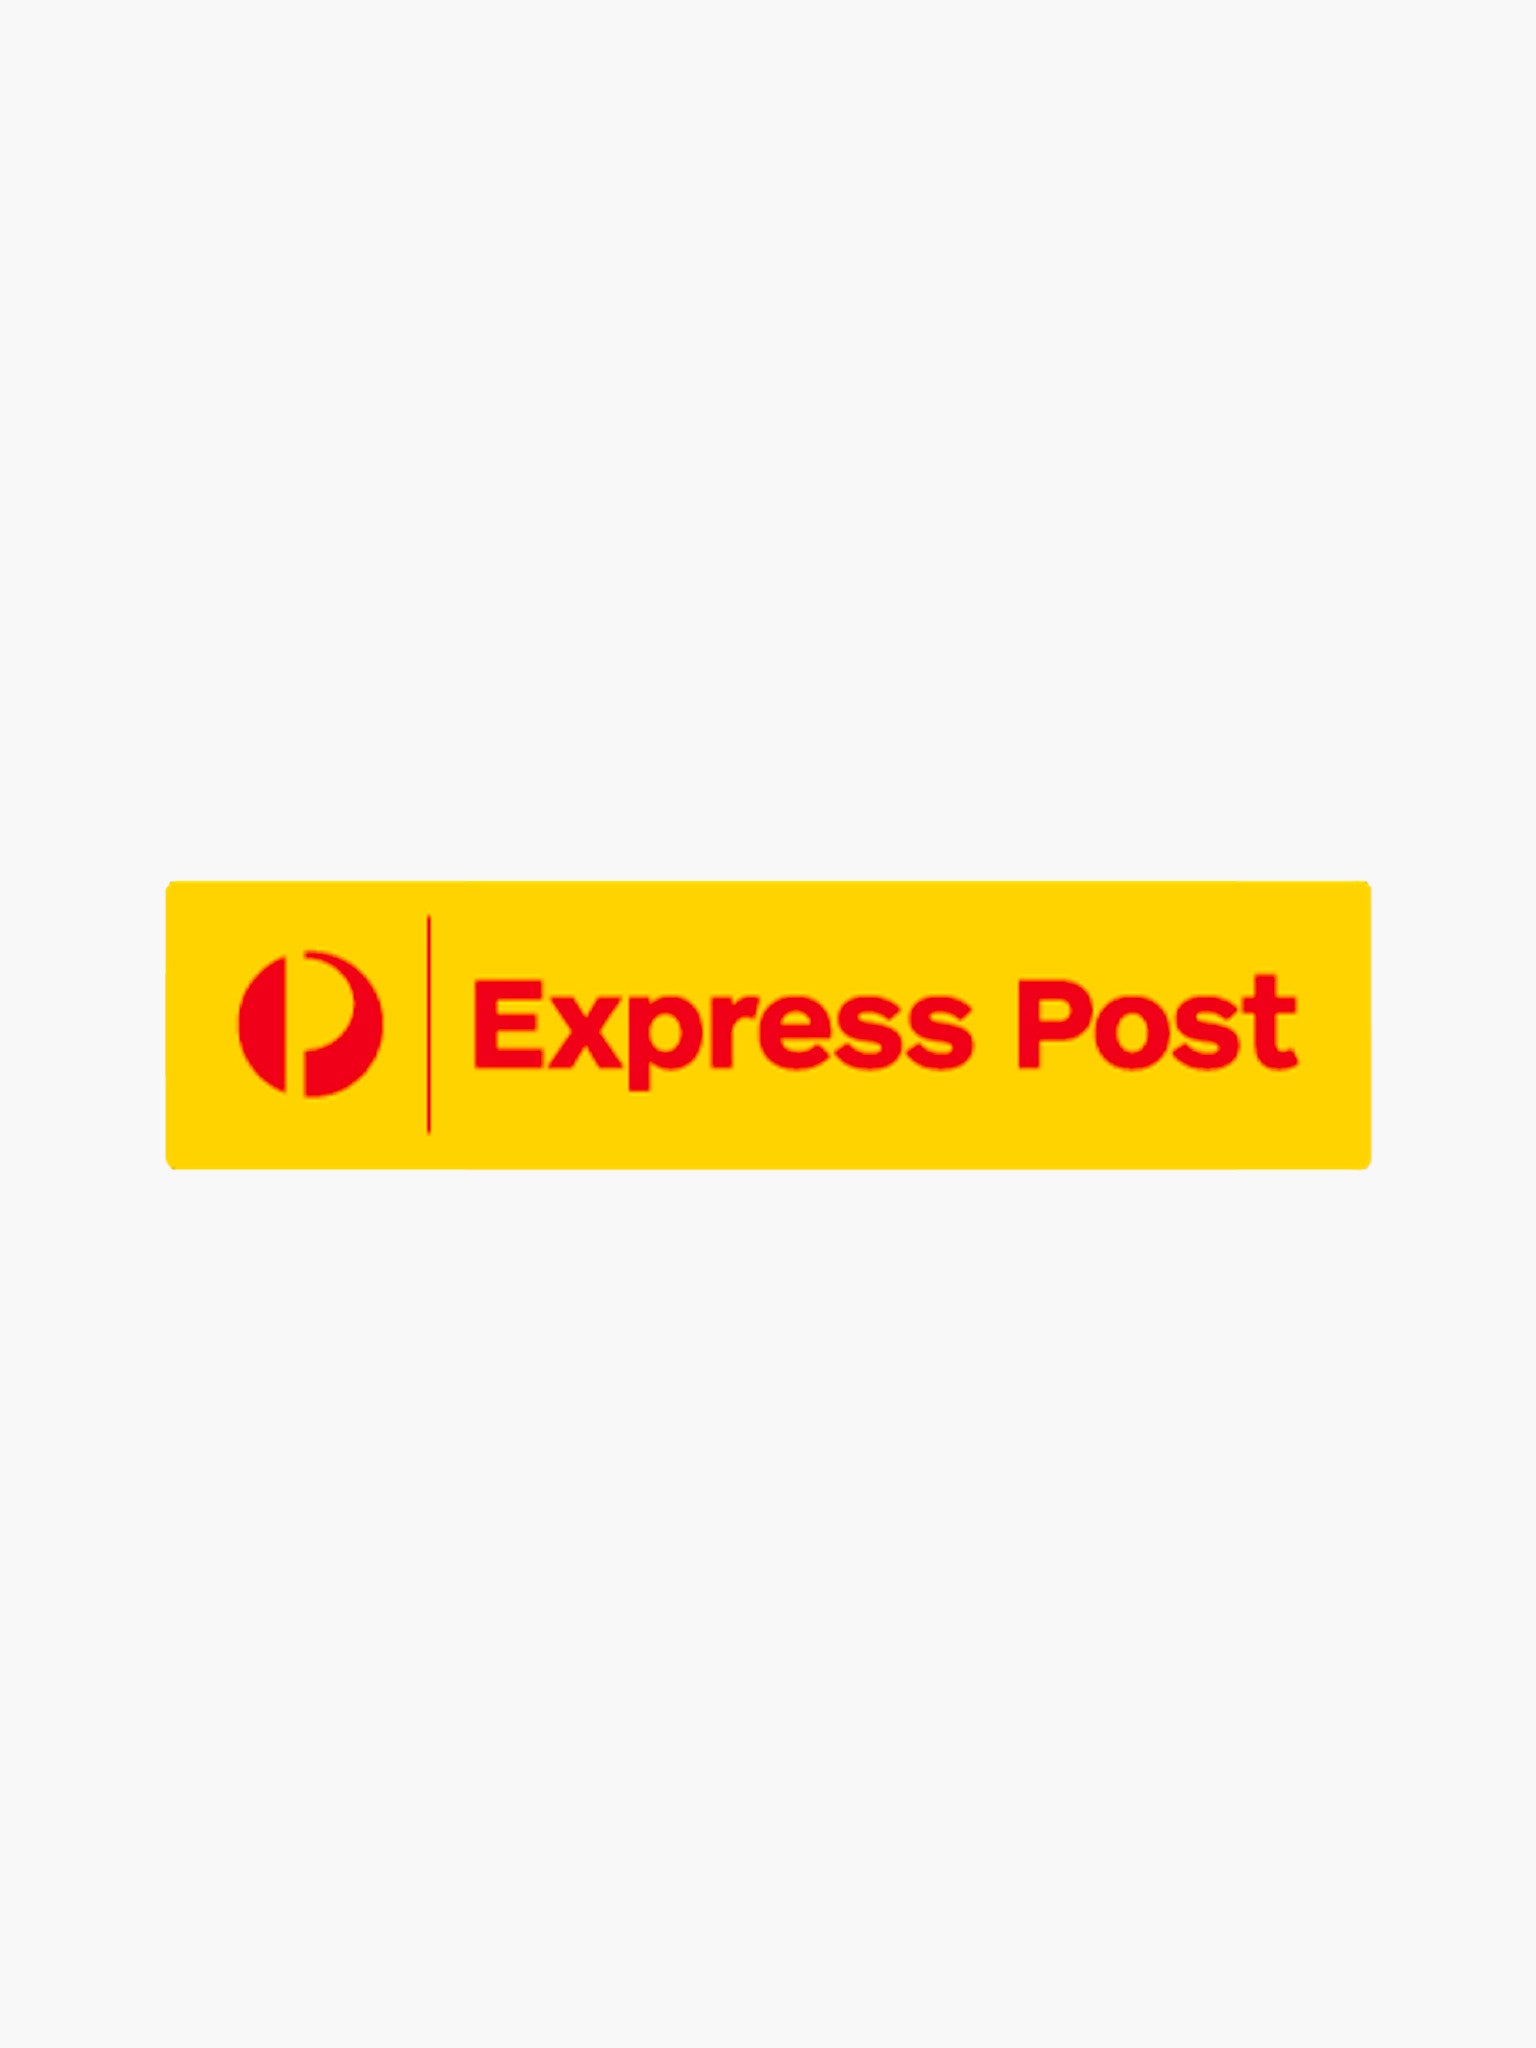 Shipping Upgrade - Express Post (Domestic)